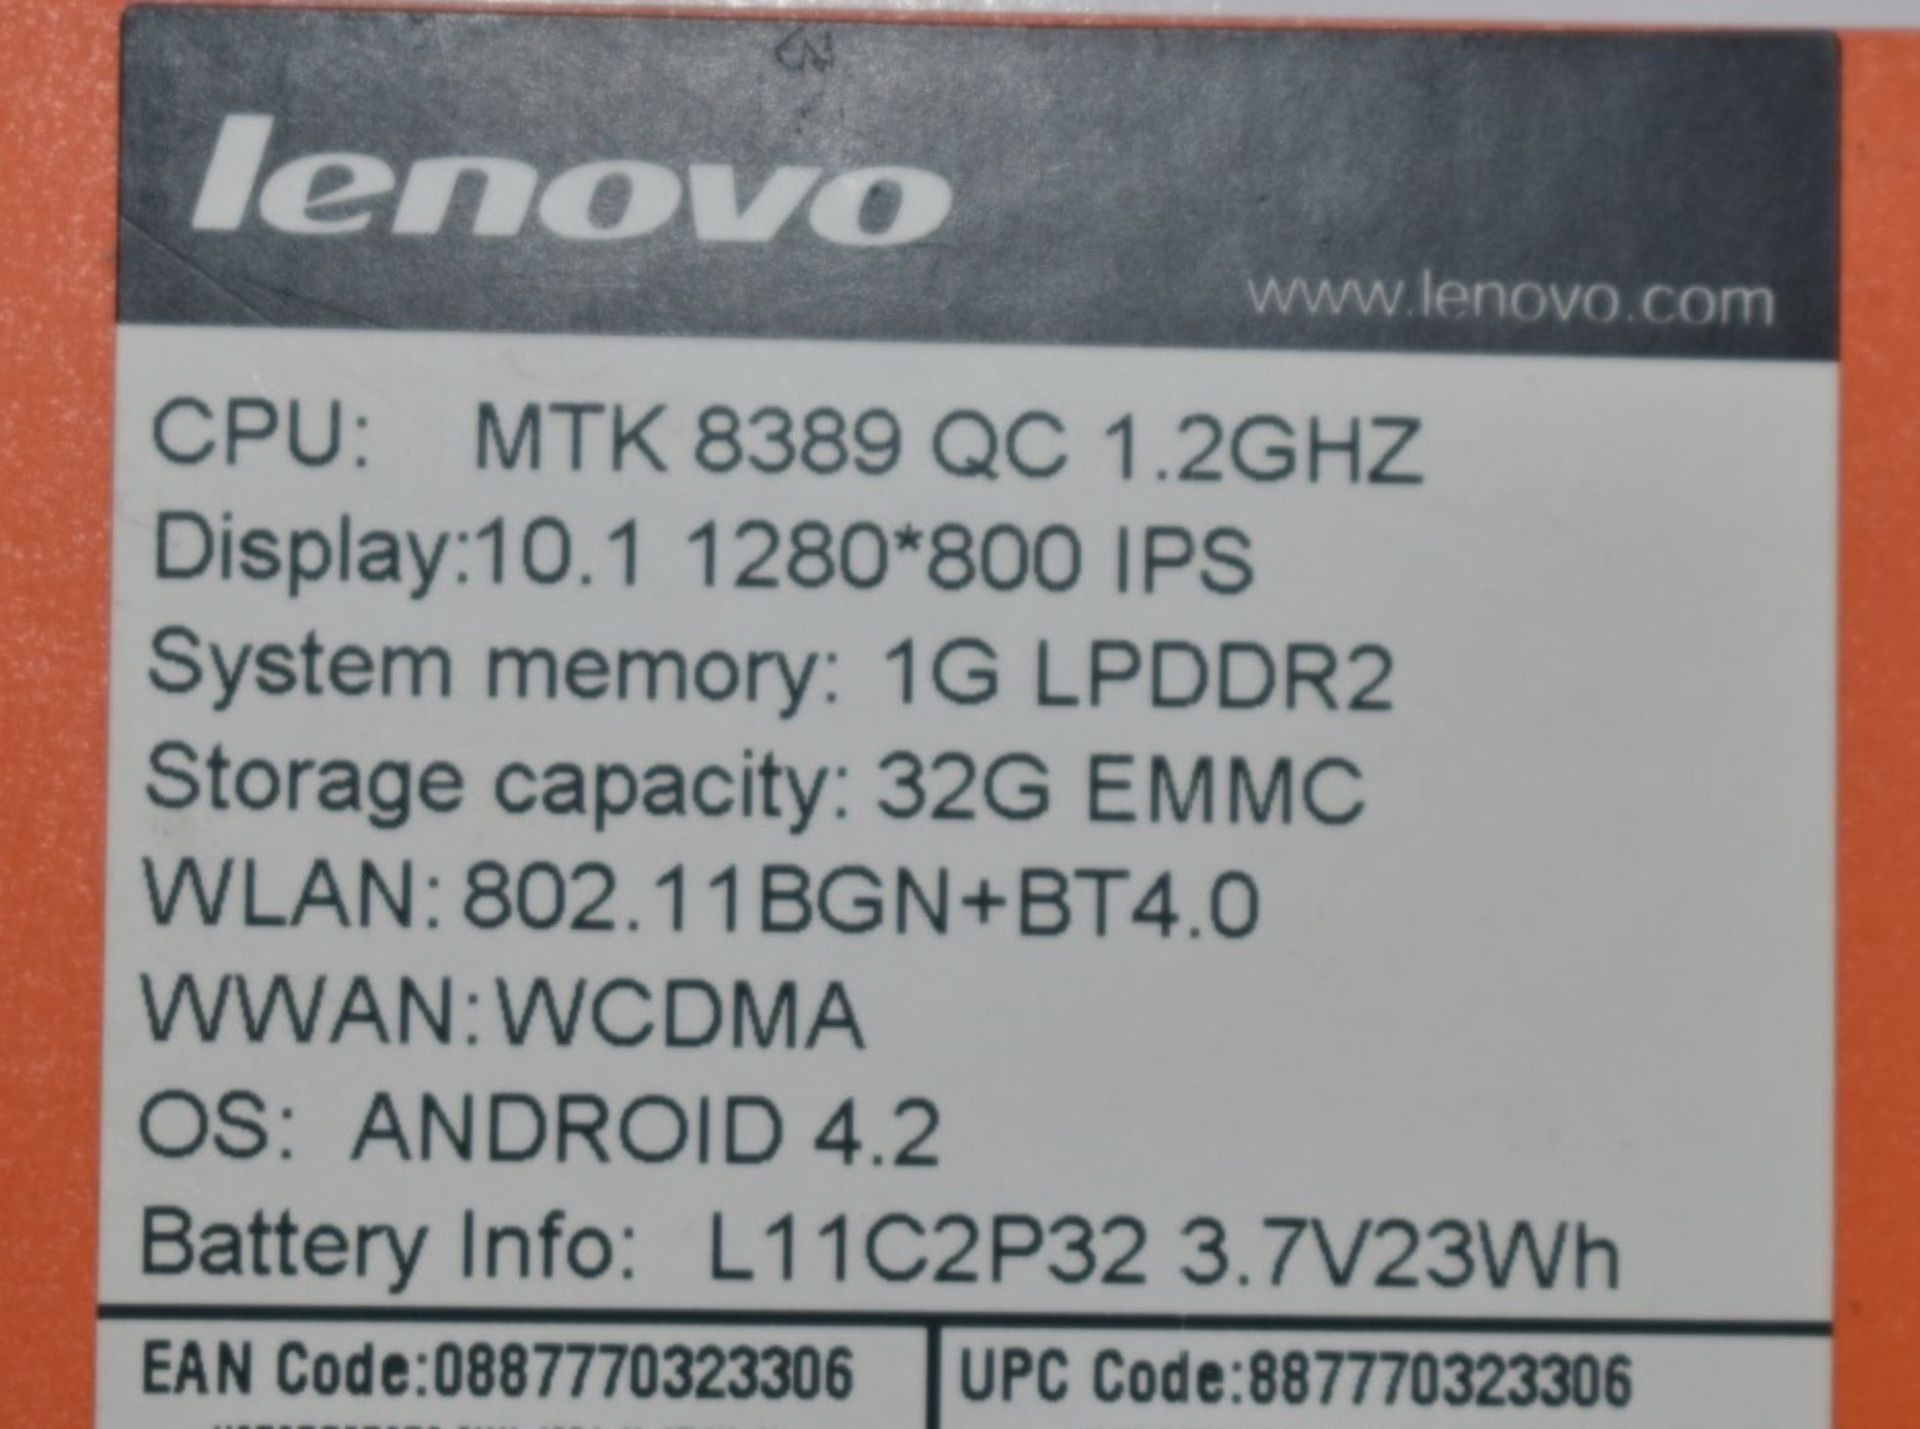 1 x Lenovo S6000 10.1inch Tablet Featuring a Quad Core 1.2GHz Processor, 1GB RAM, 32GB Storage - Image 8 of 8